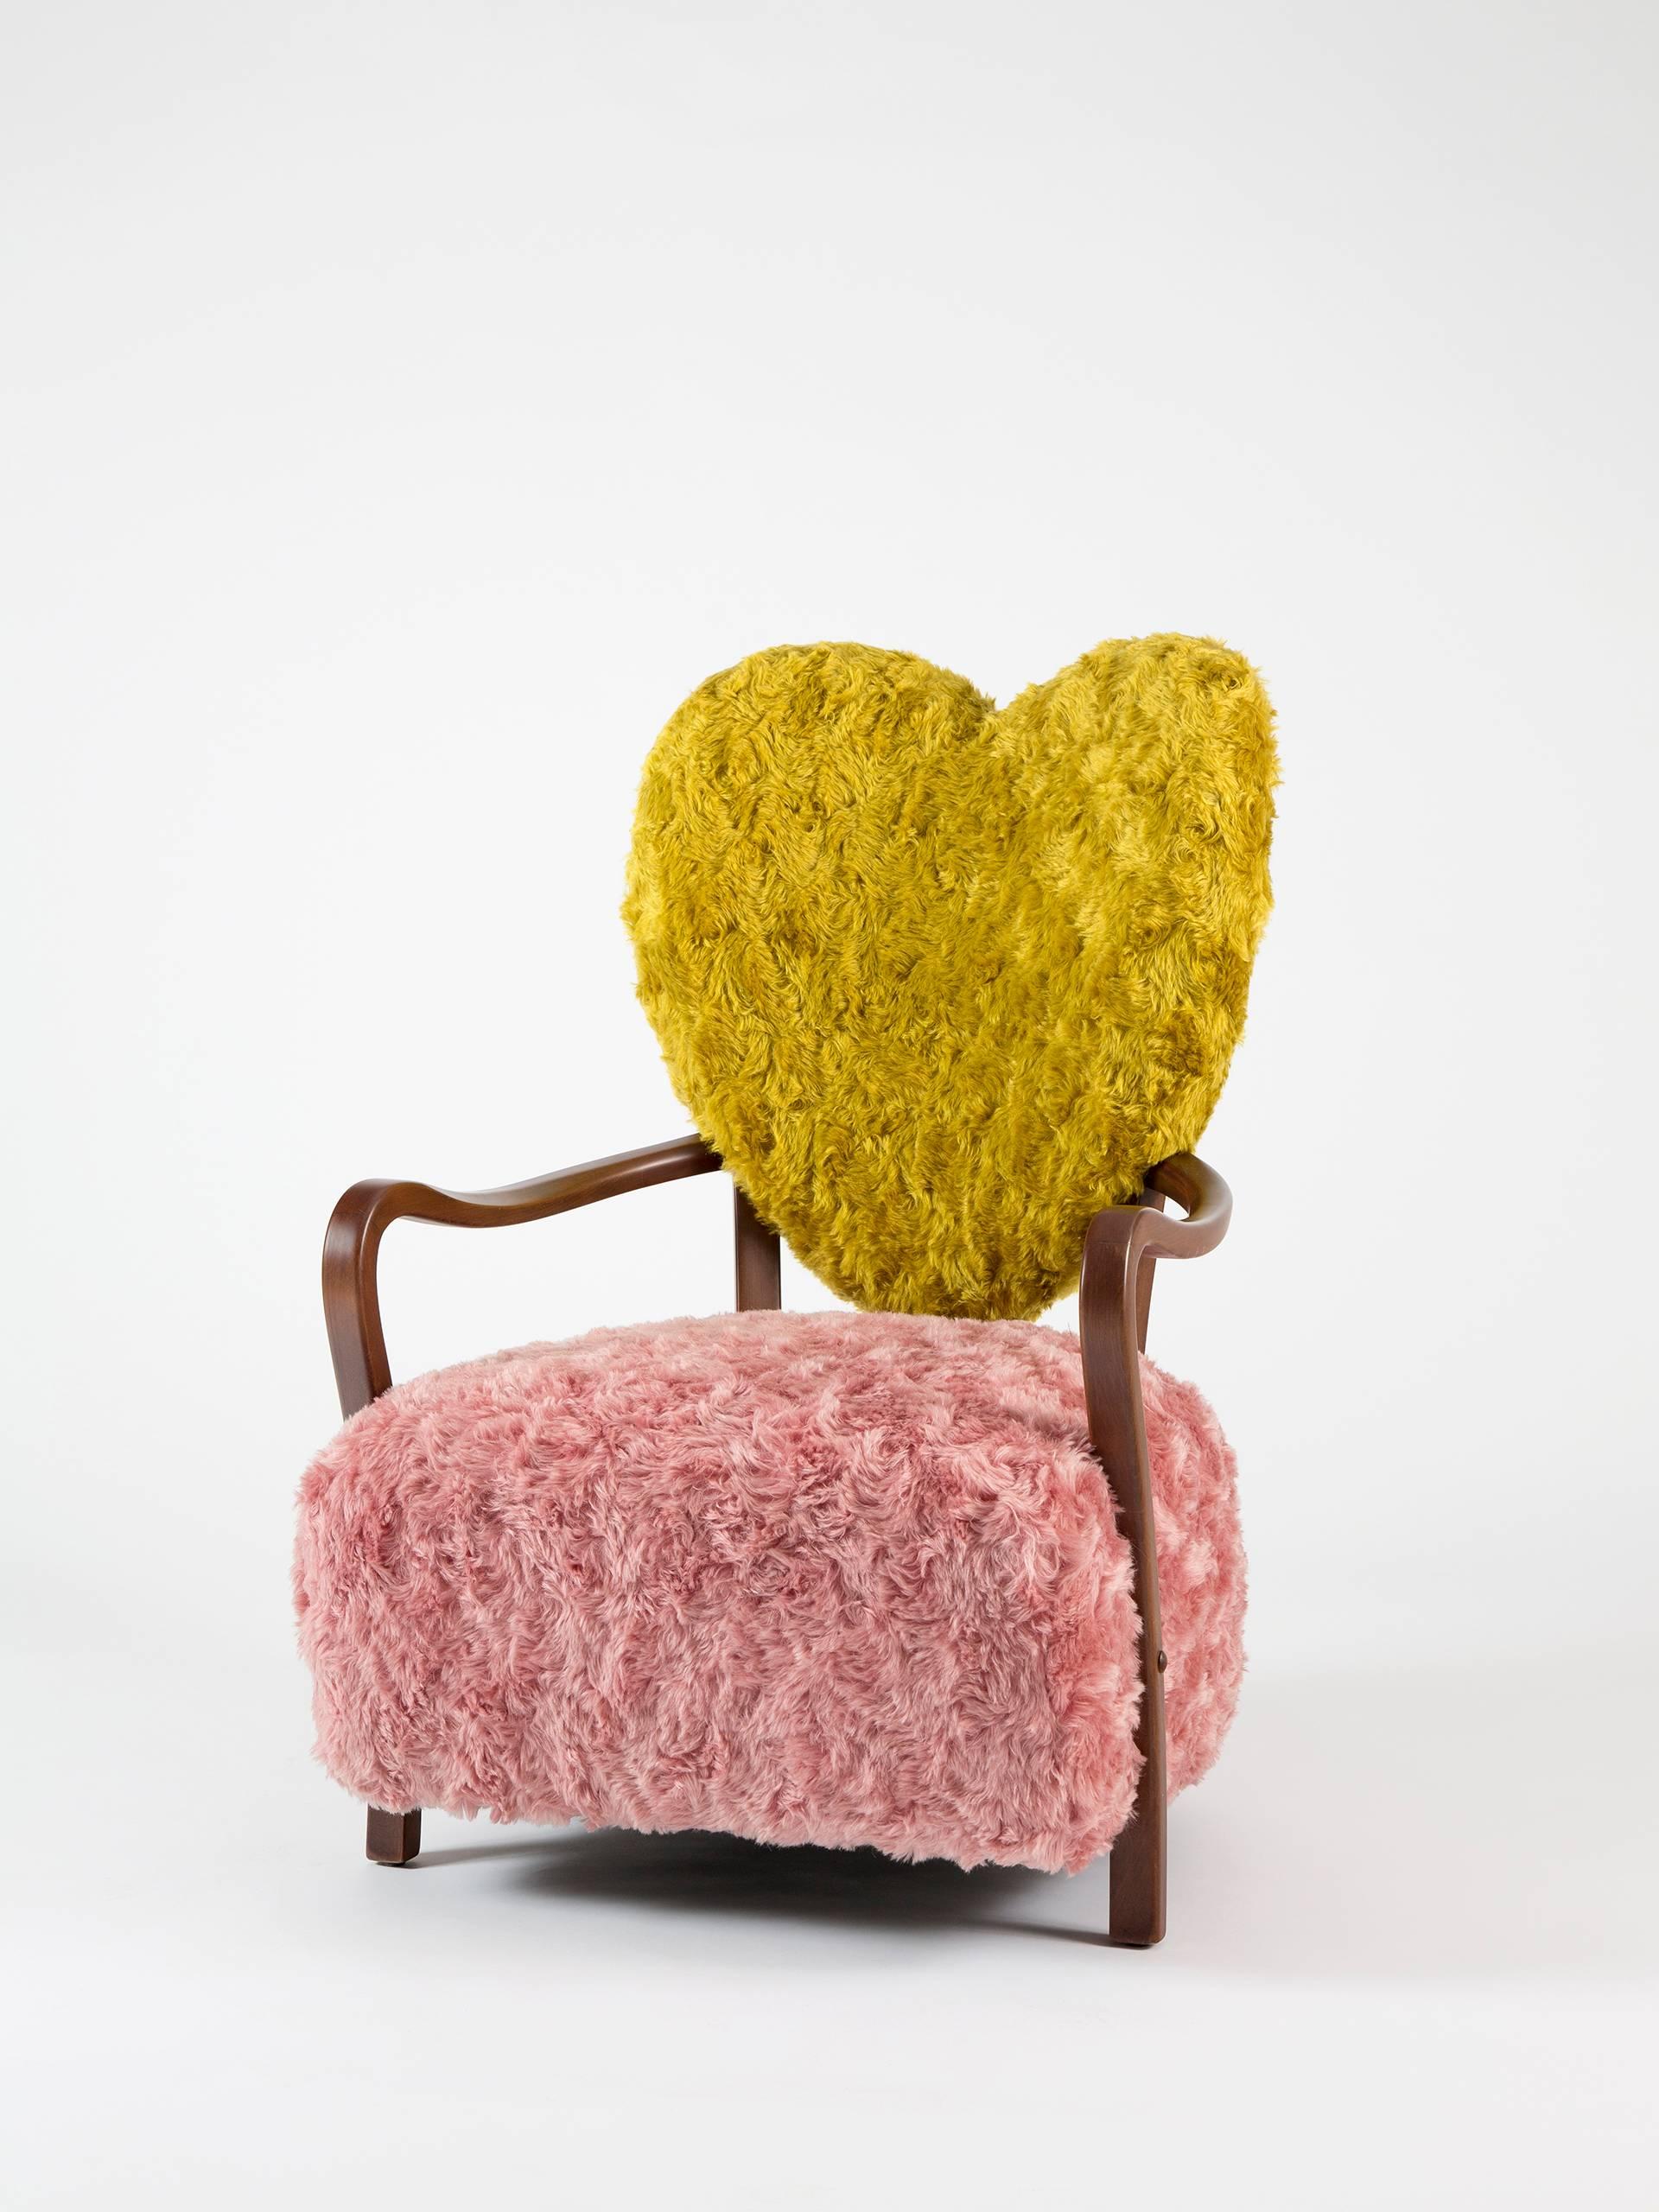 Dedicated to all the broken hearts, Uni represents both separation and unification of souls. Contrasting of pink yellow reflect the differences between any two living things and the beauty of their combination.

Uni is upholstered with %100 mohair